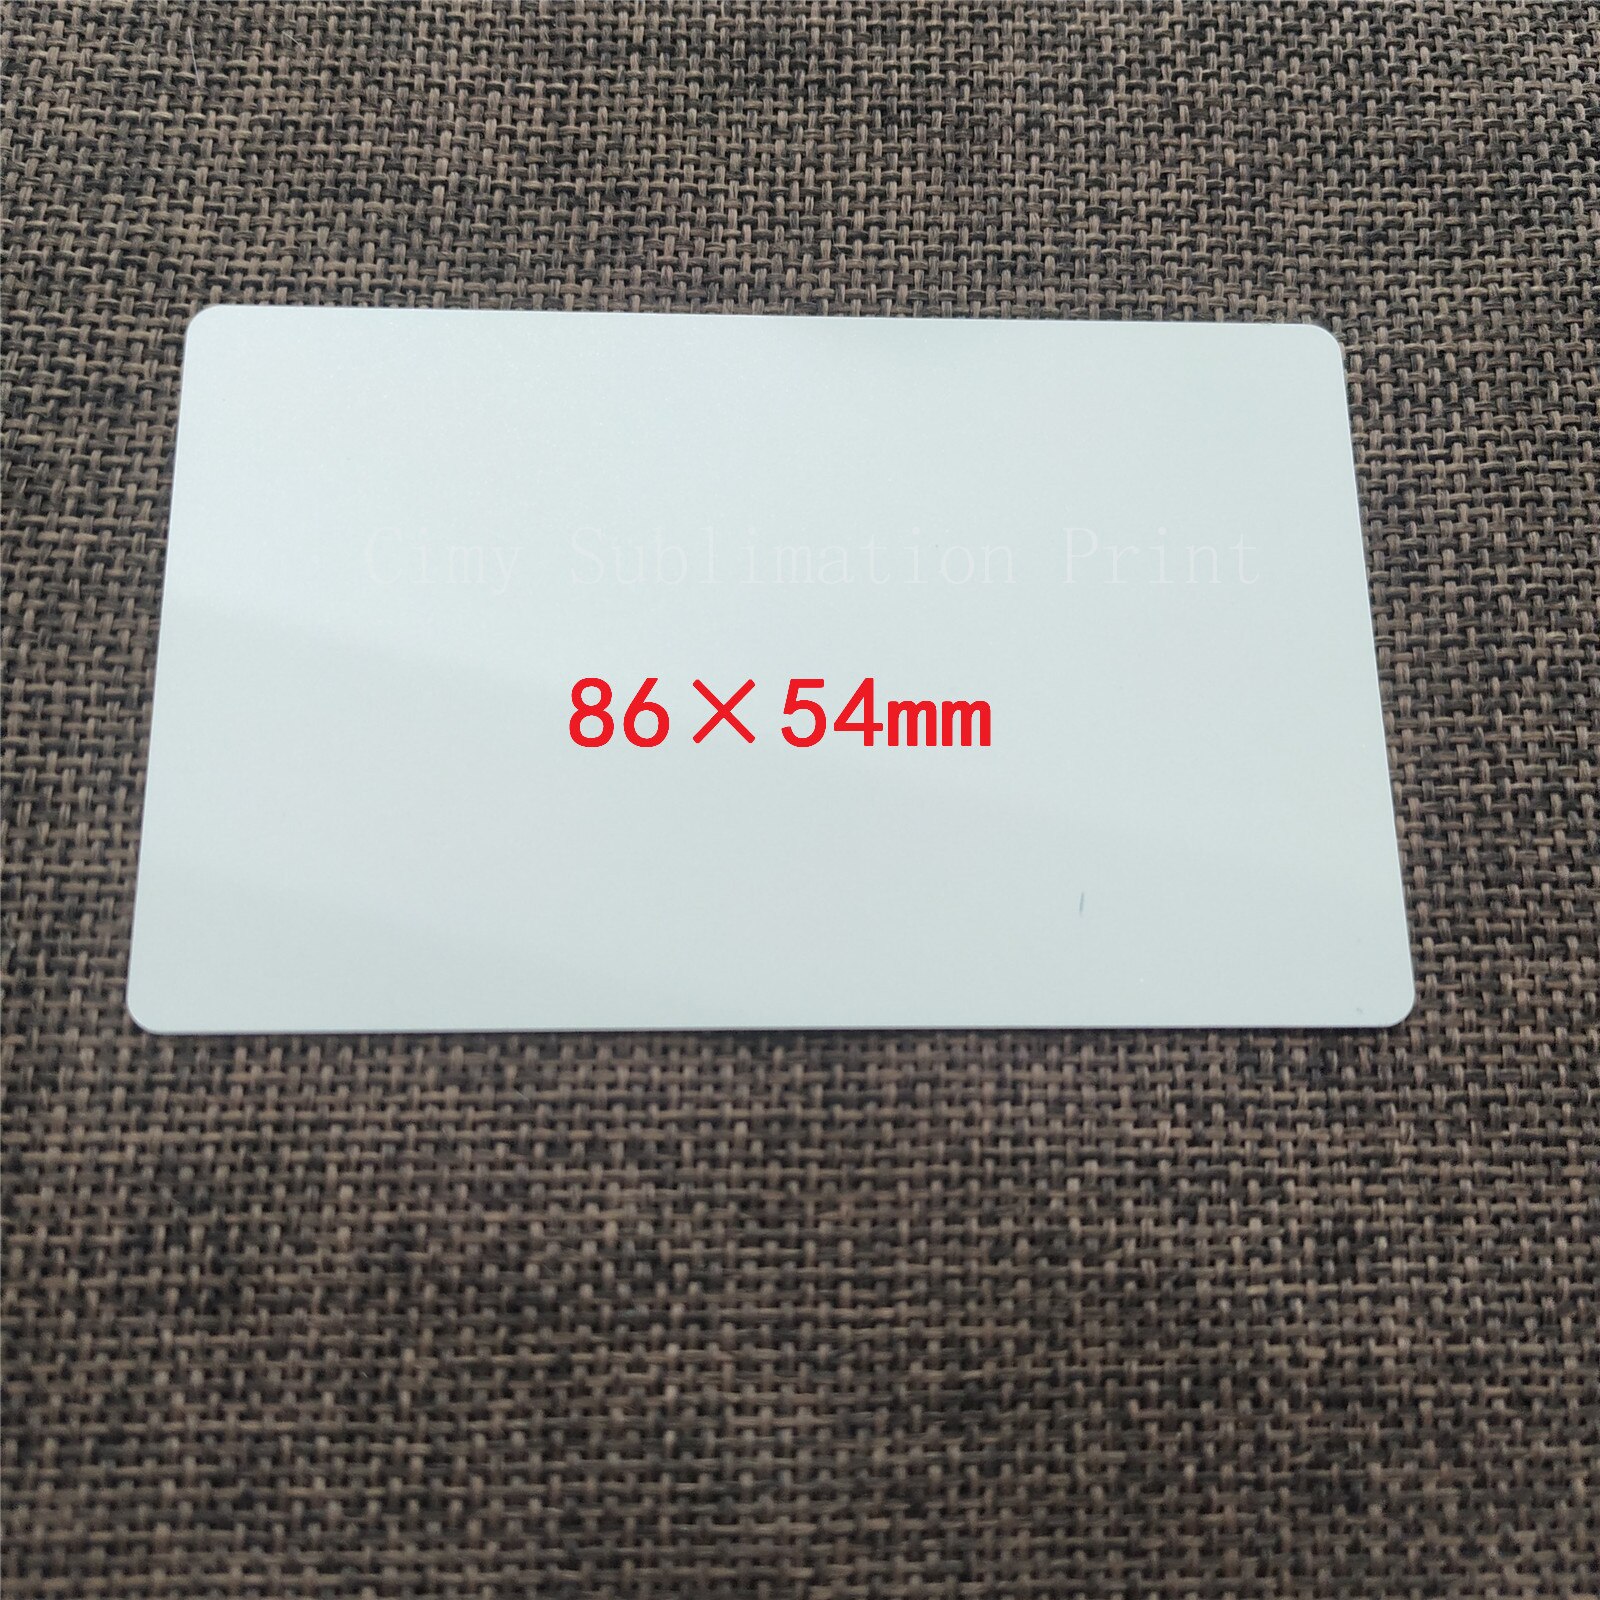 100sheets 0.45mm 86*54mm Blank Sublimation Metal Plate Aluminium sheet Name Card Printing Sublimation Ink Transfer DIY Craft: Pearl White